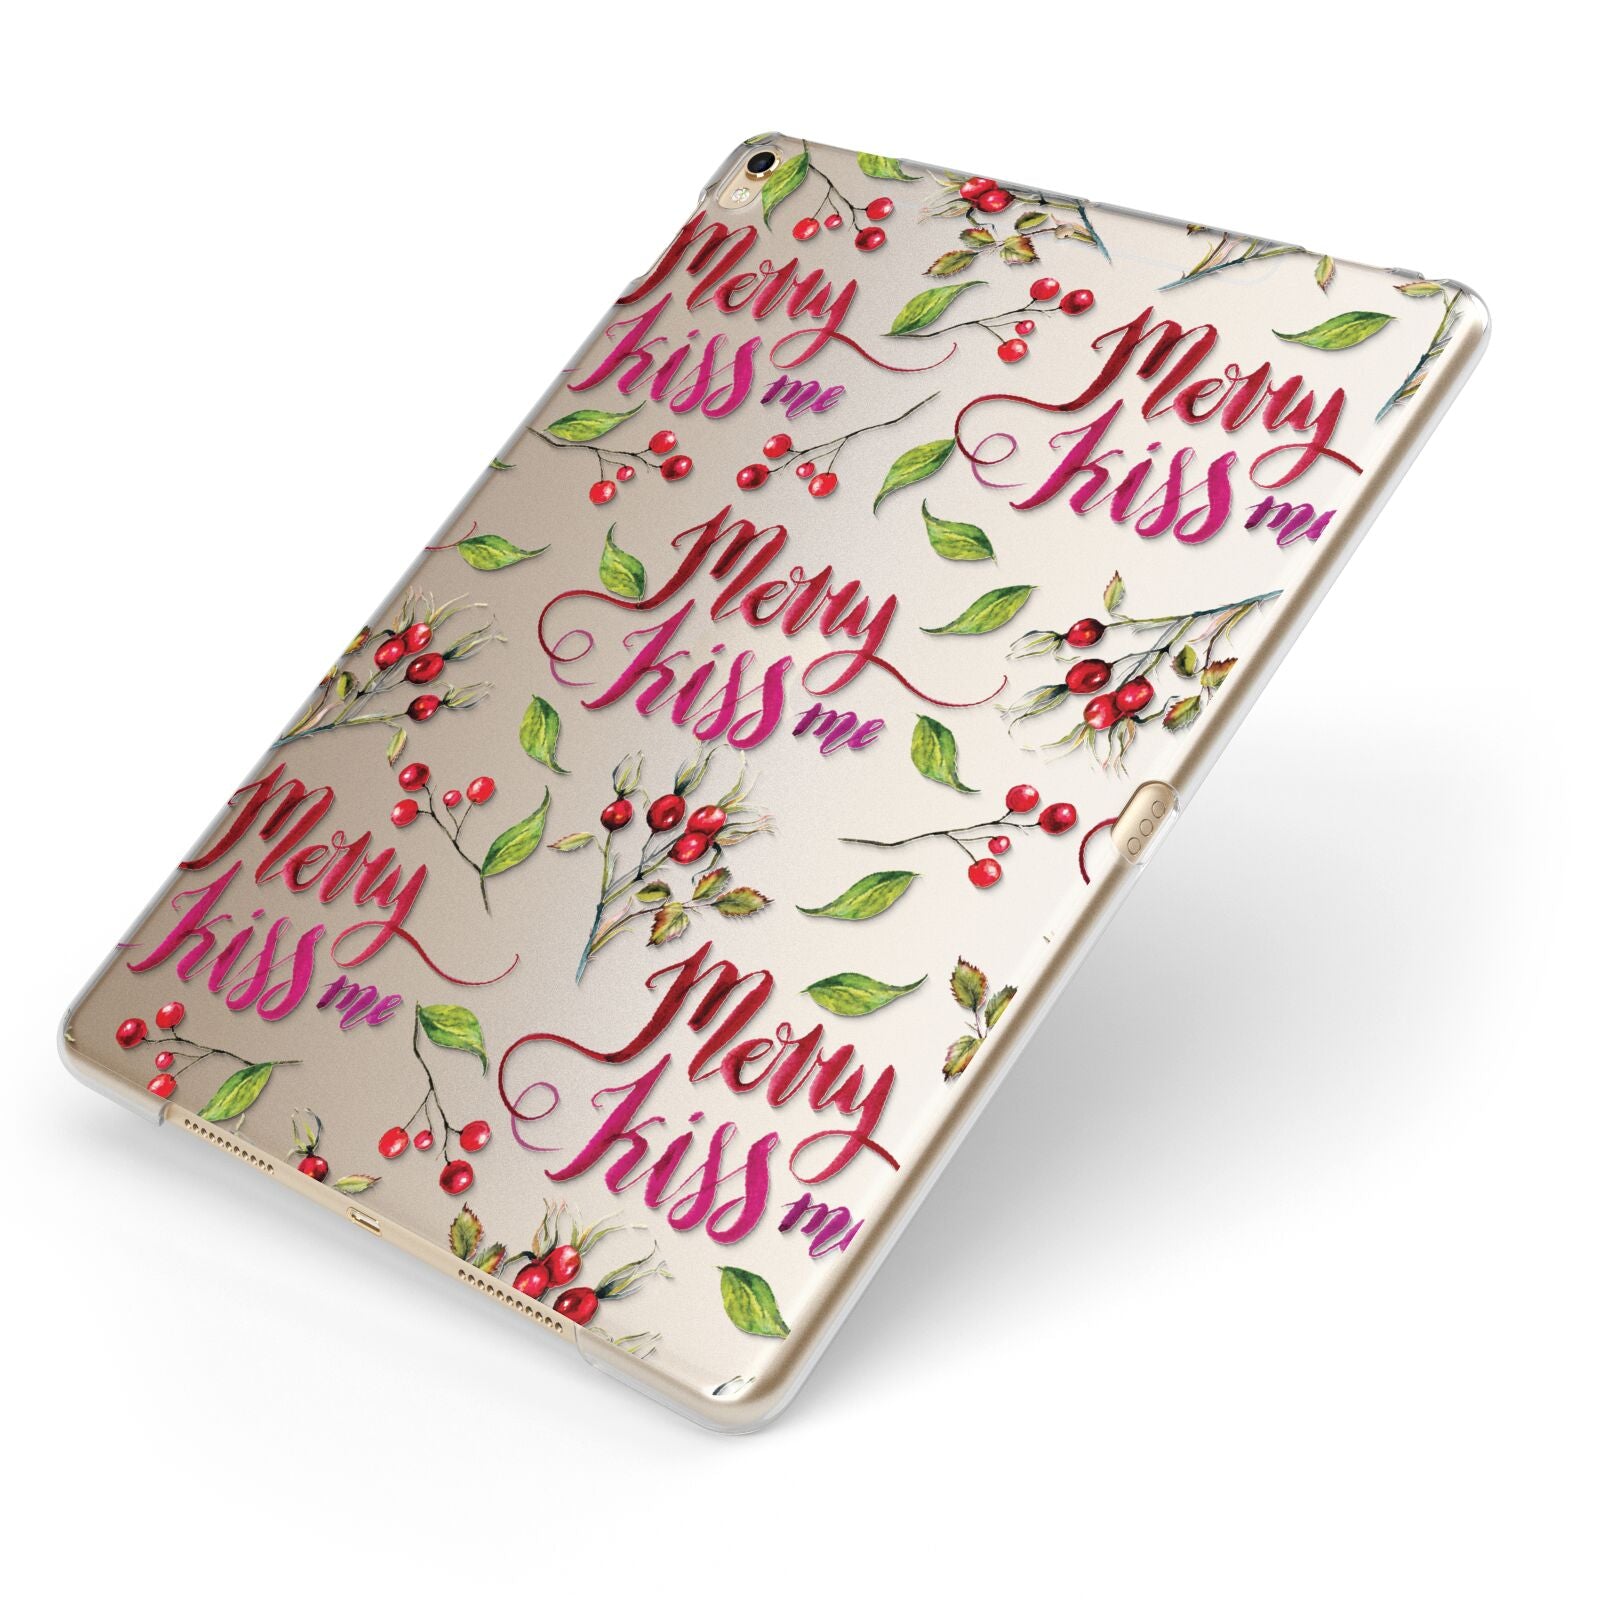 Merry kiss me Apple iPad Case on Gold iPad Side View